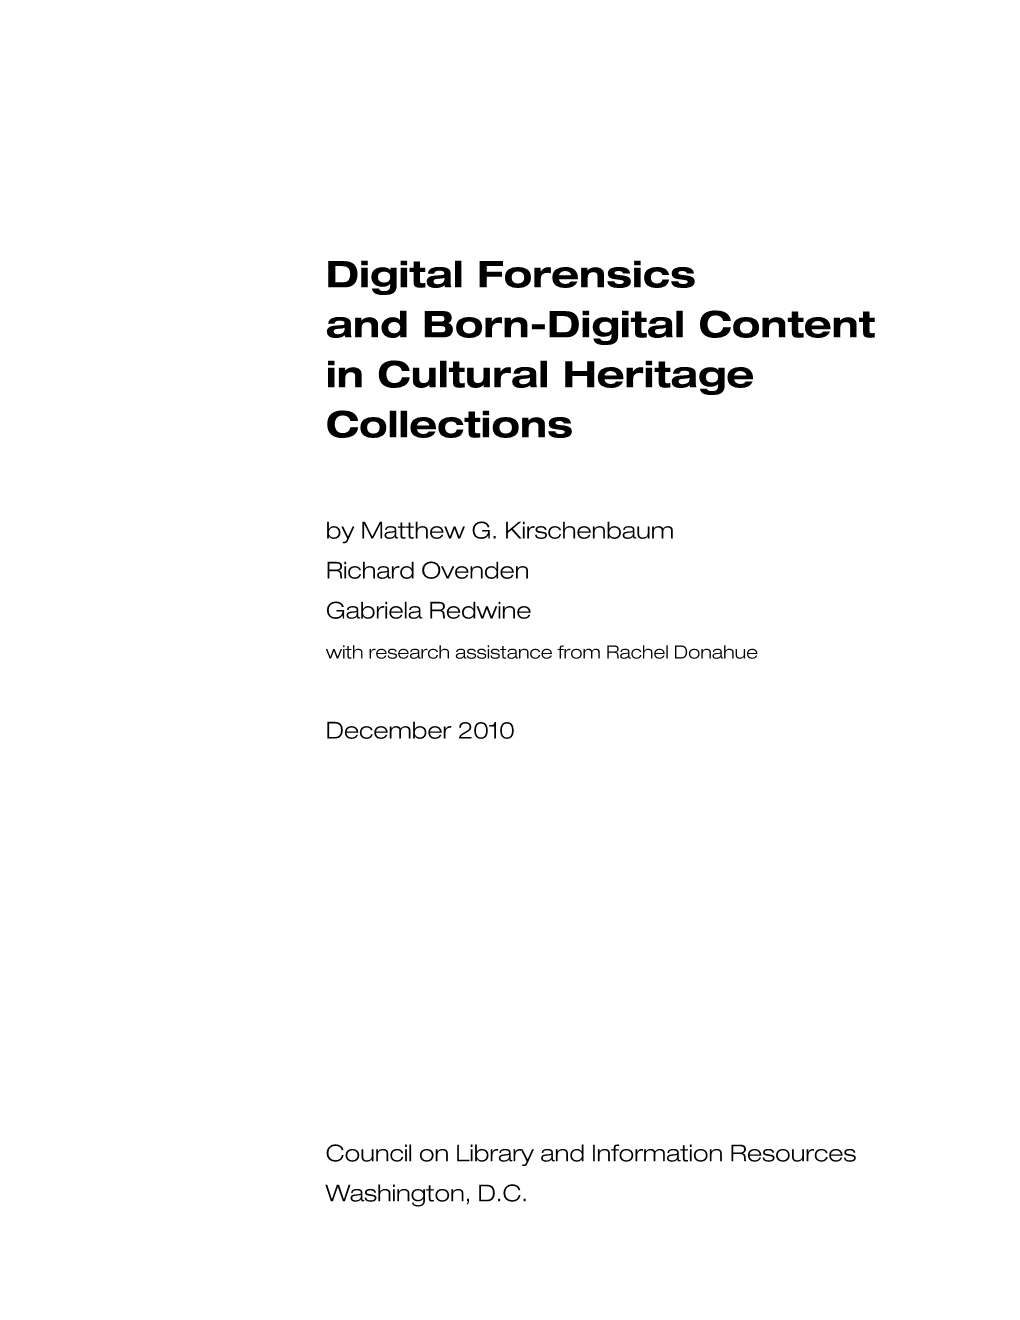 Digital Forensics and Born-Digital Content in Cultural Heritage Collections